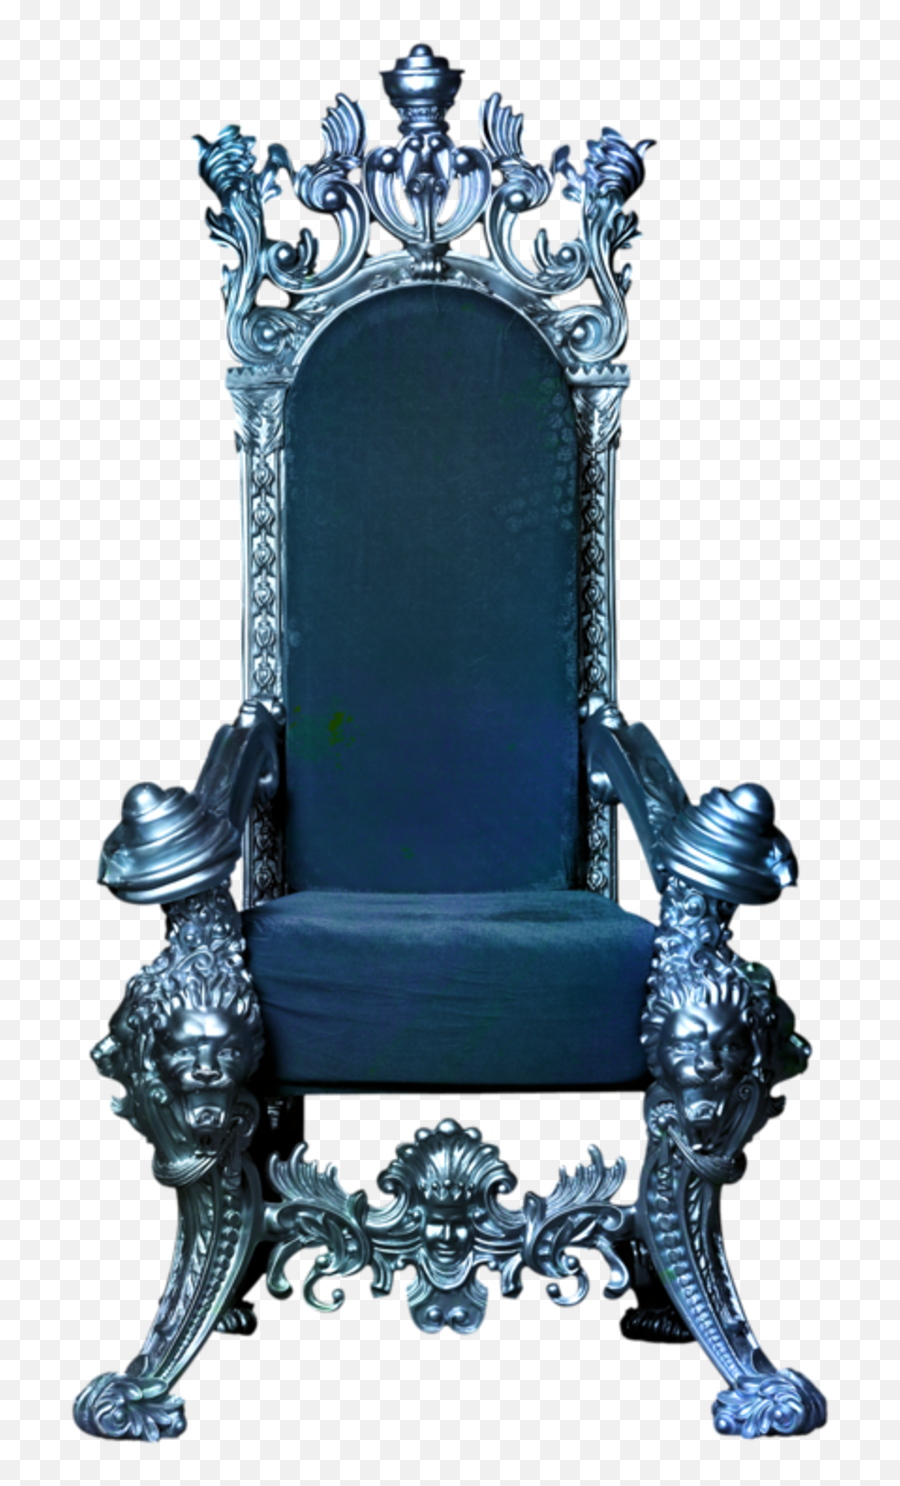 Free Png Chair - Konfest,Throne Chair Png